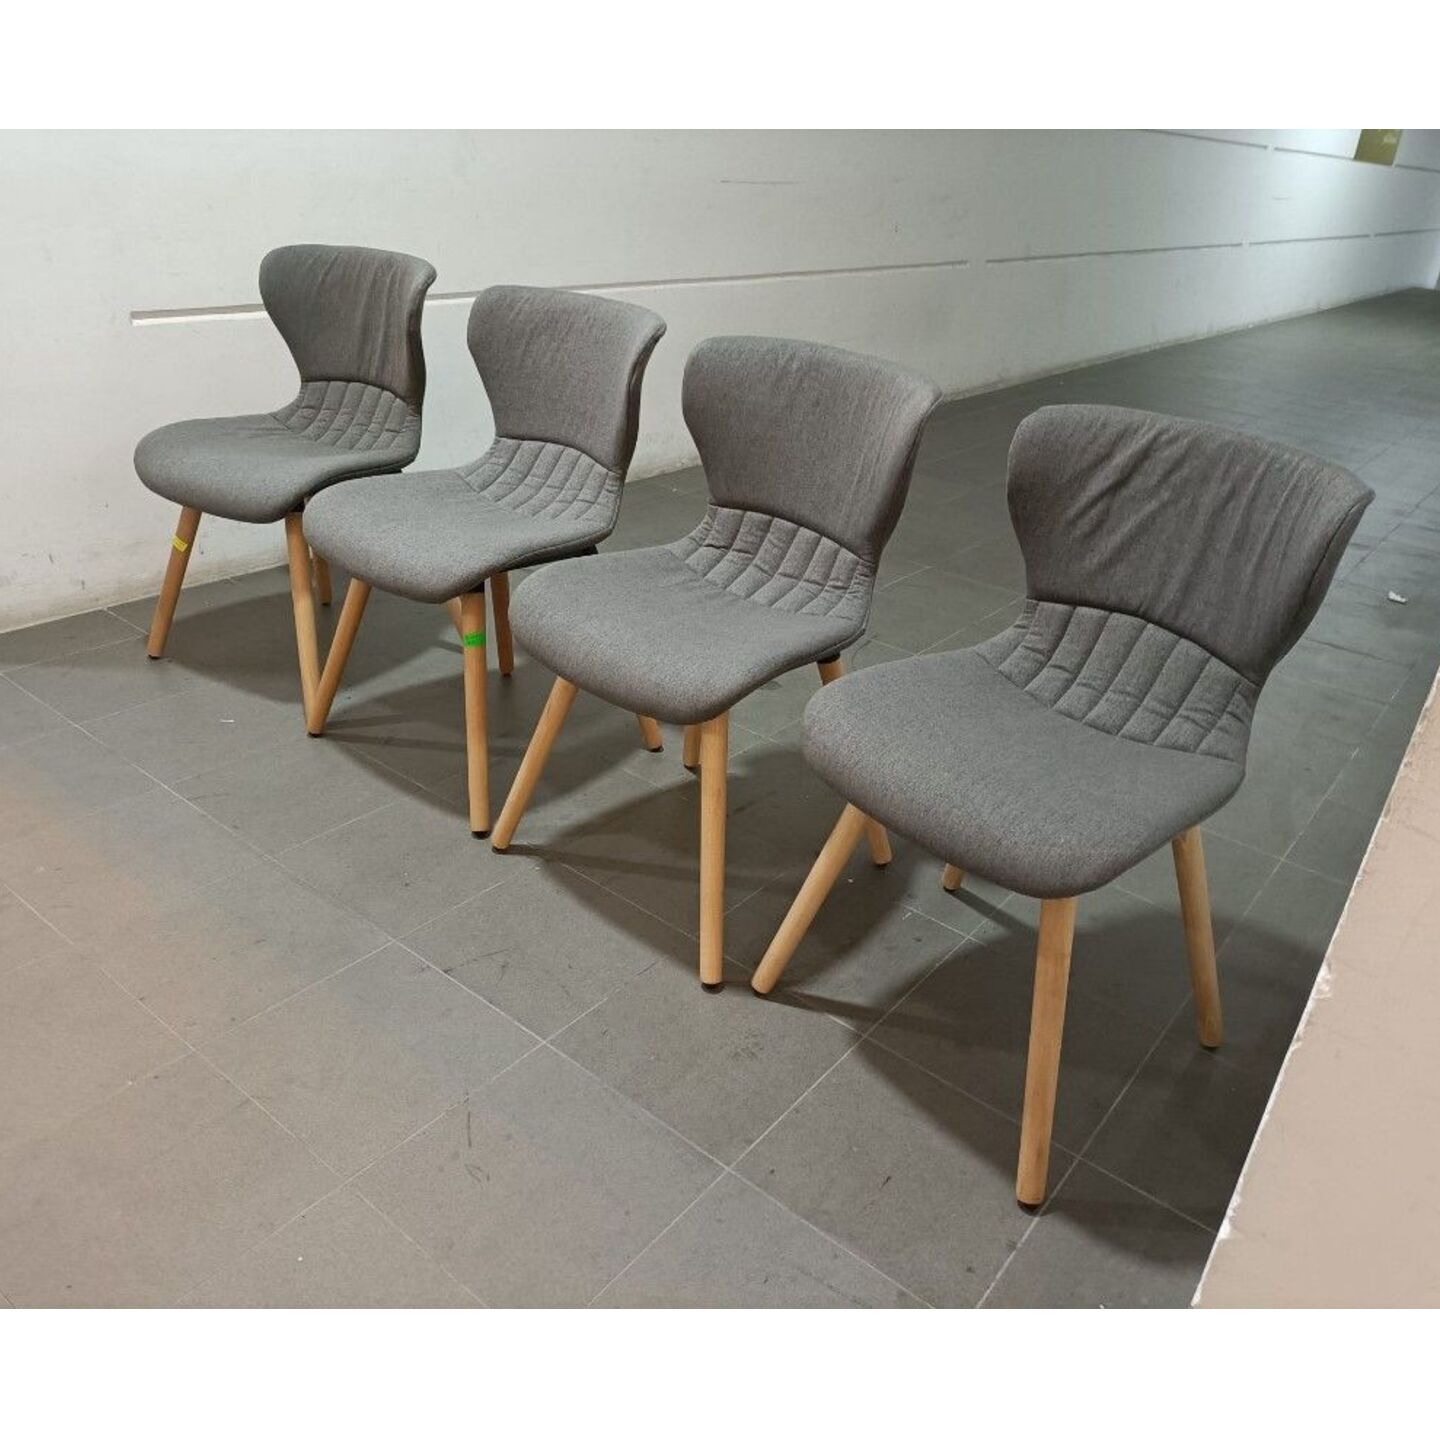 4 x ADELSON Dining Chairs in GREY